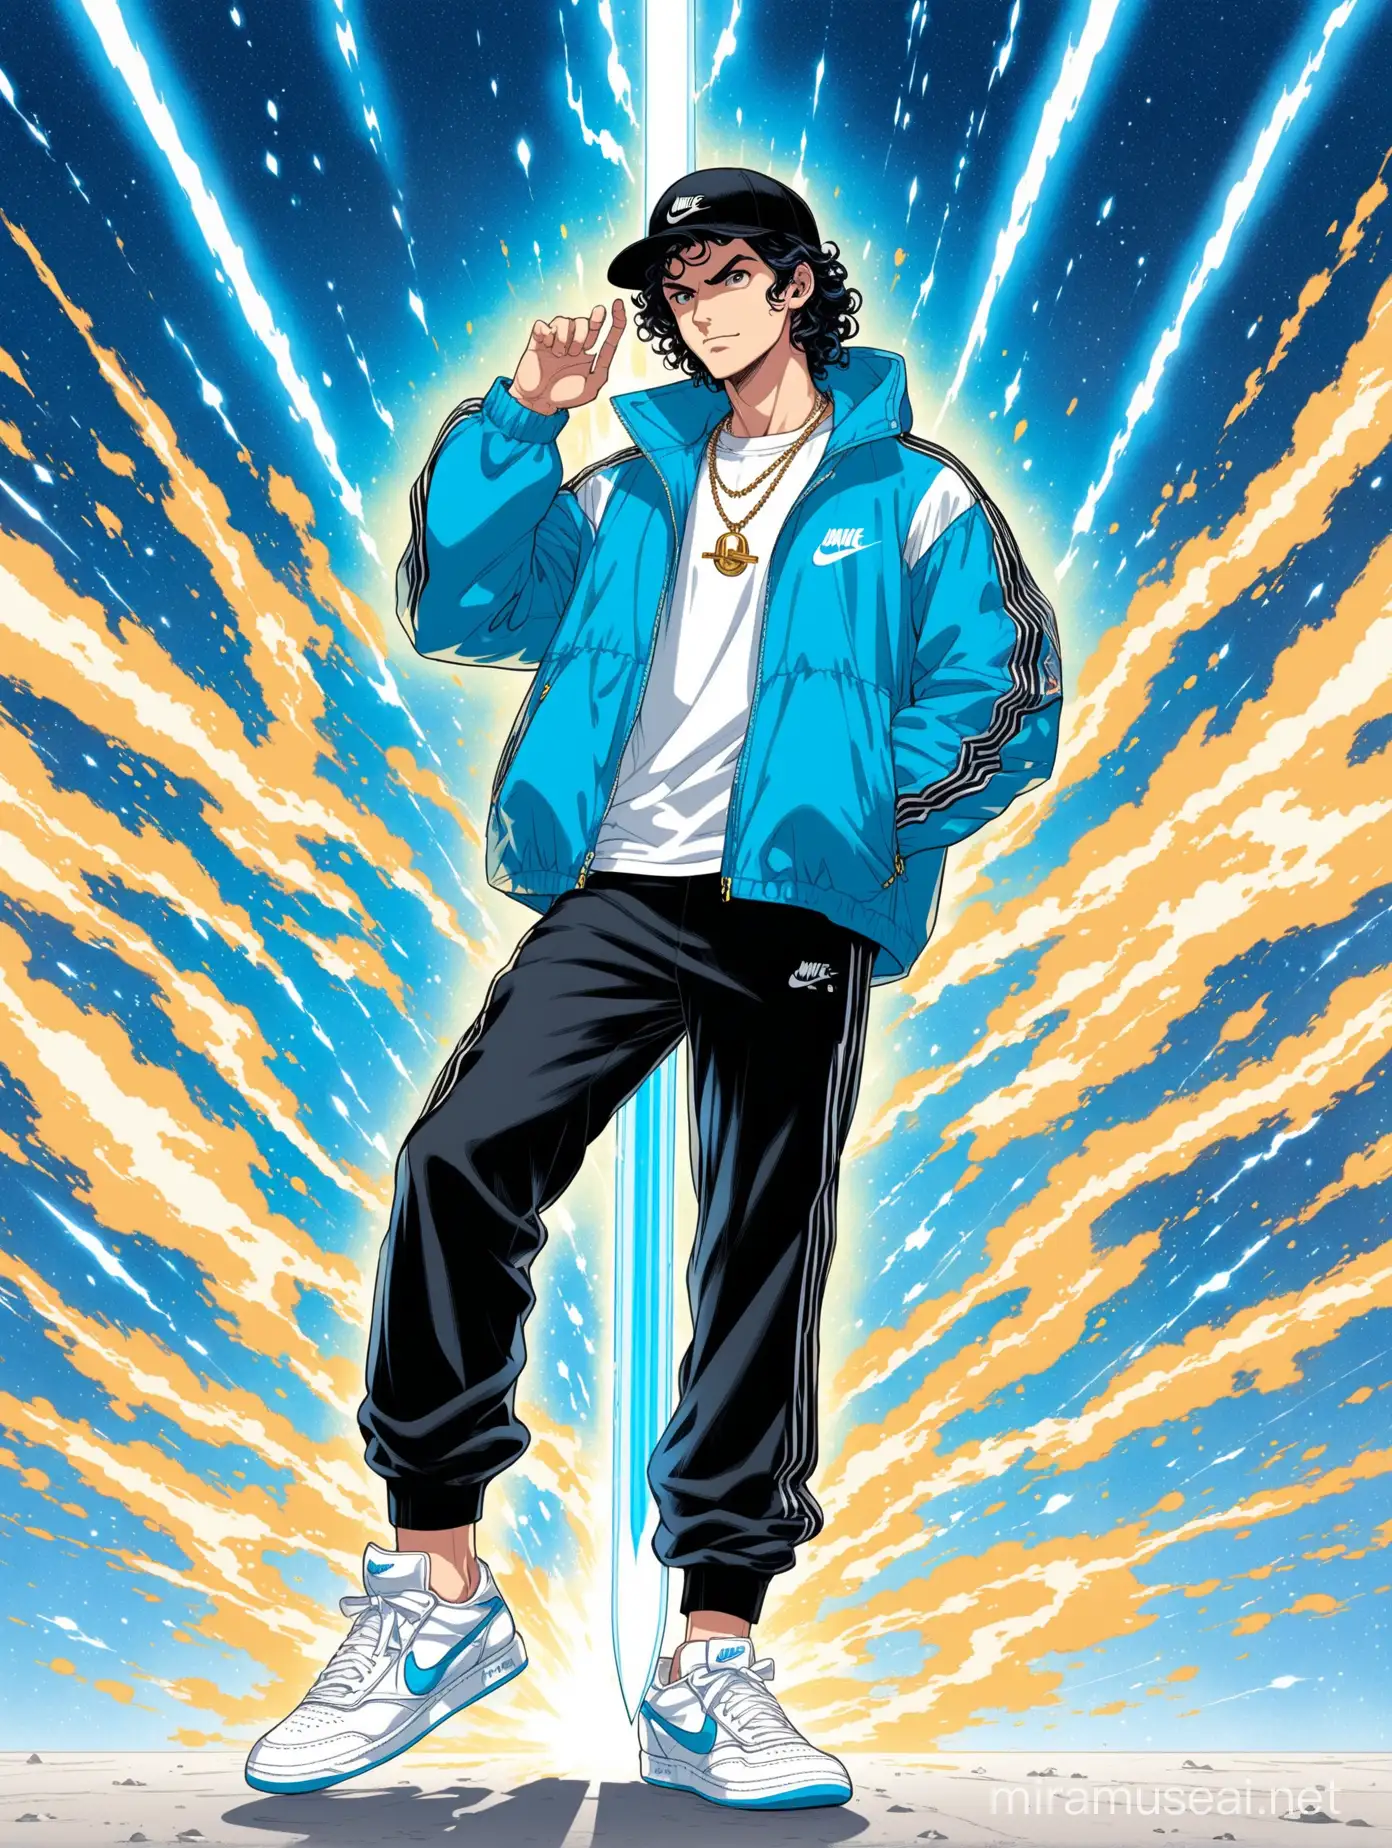 Athletic 20s Male with Energy Sword in Urban Battle Manga Style